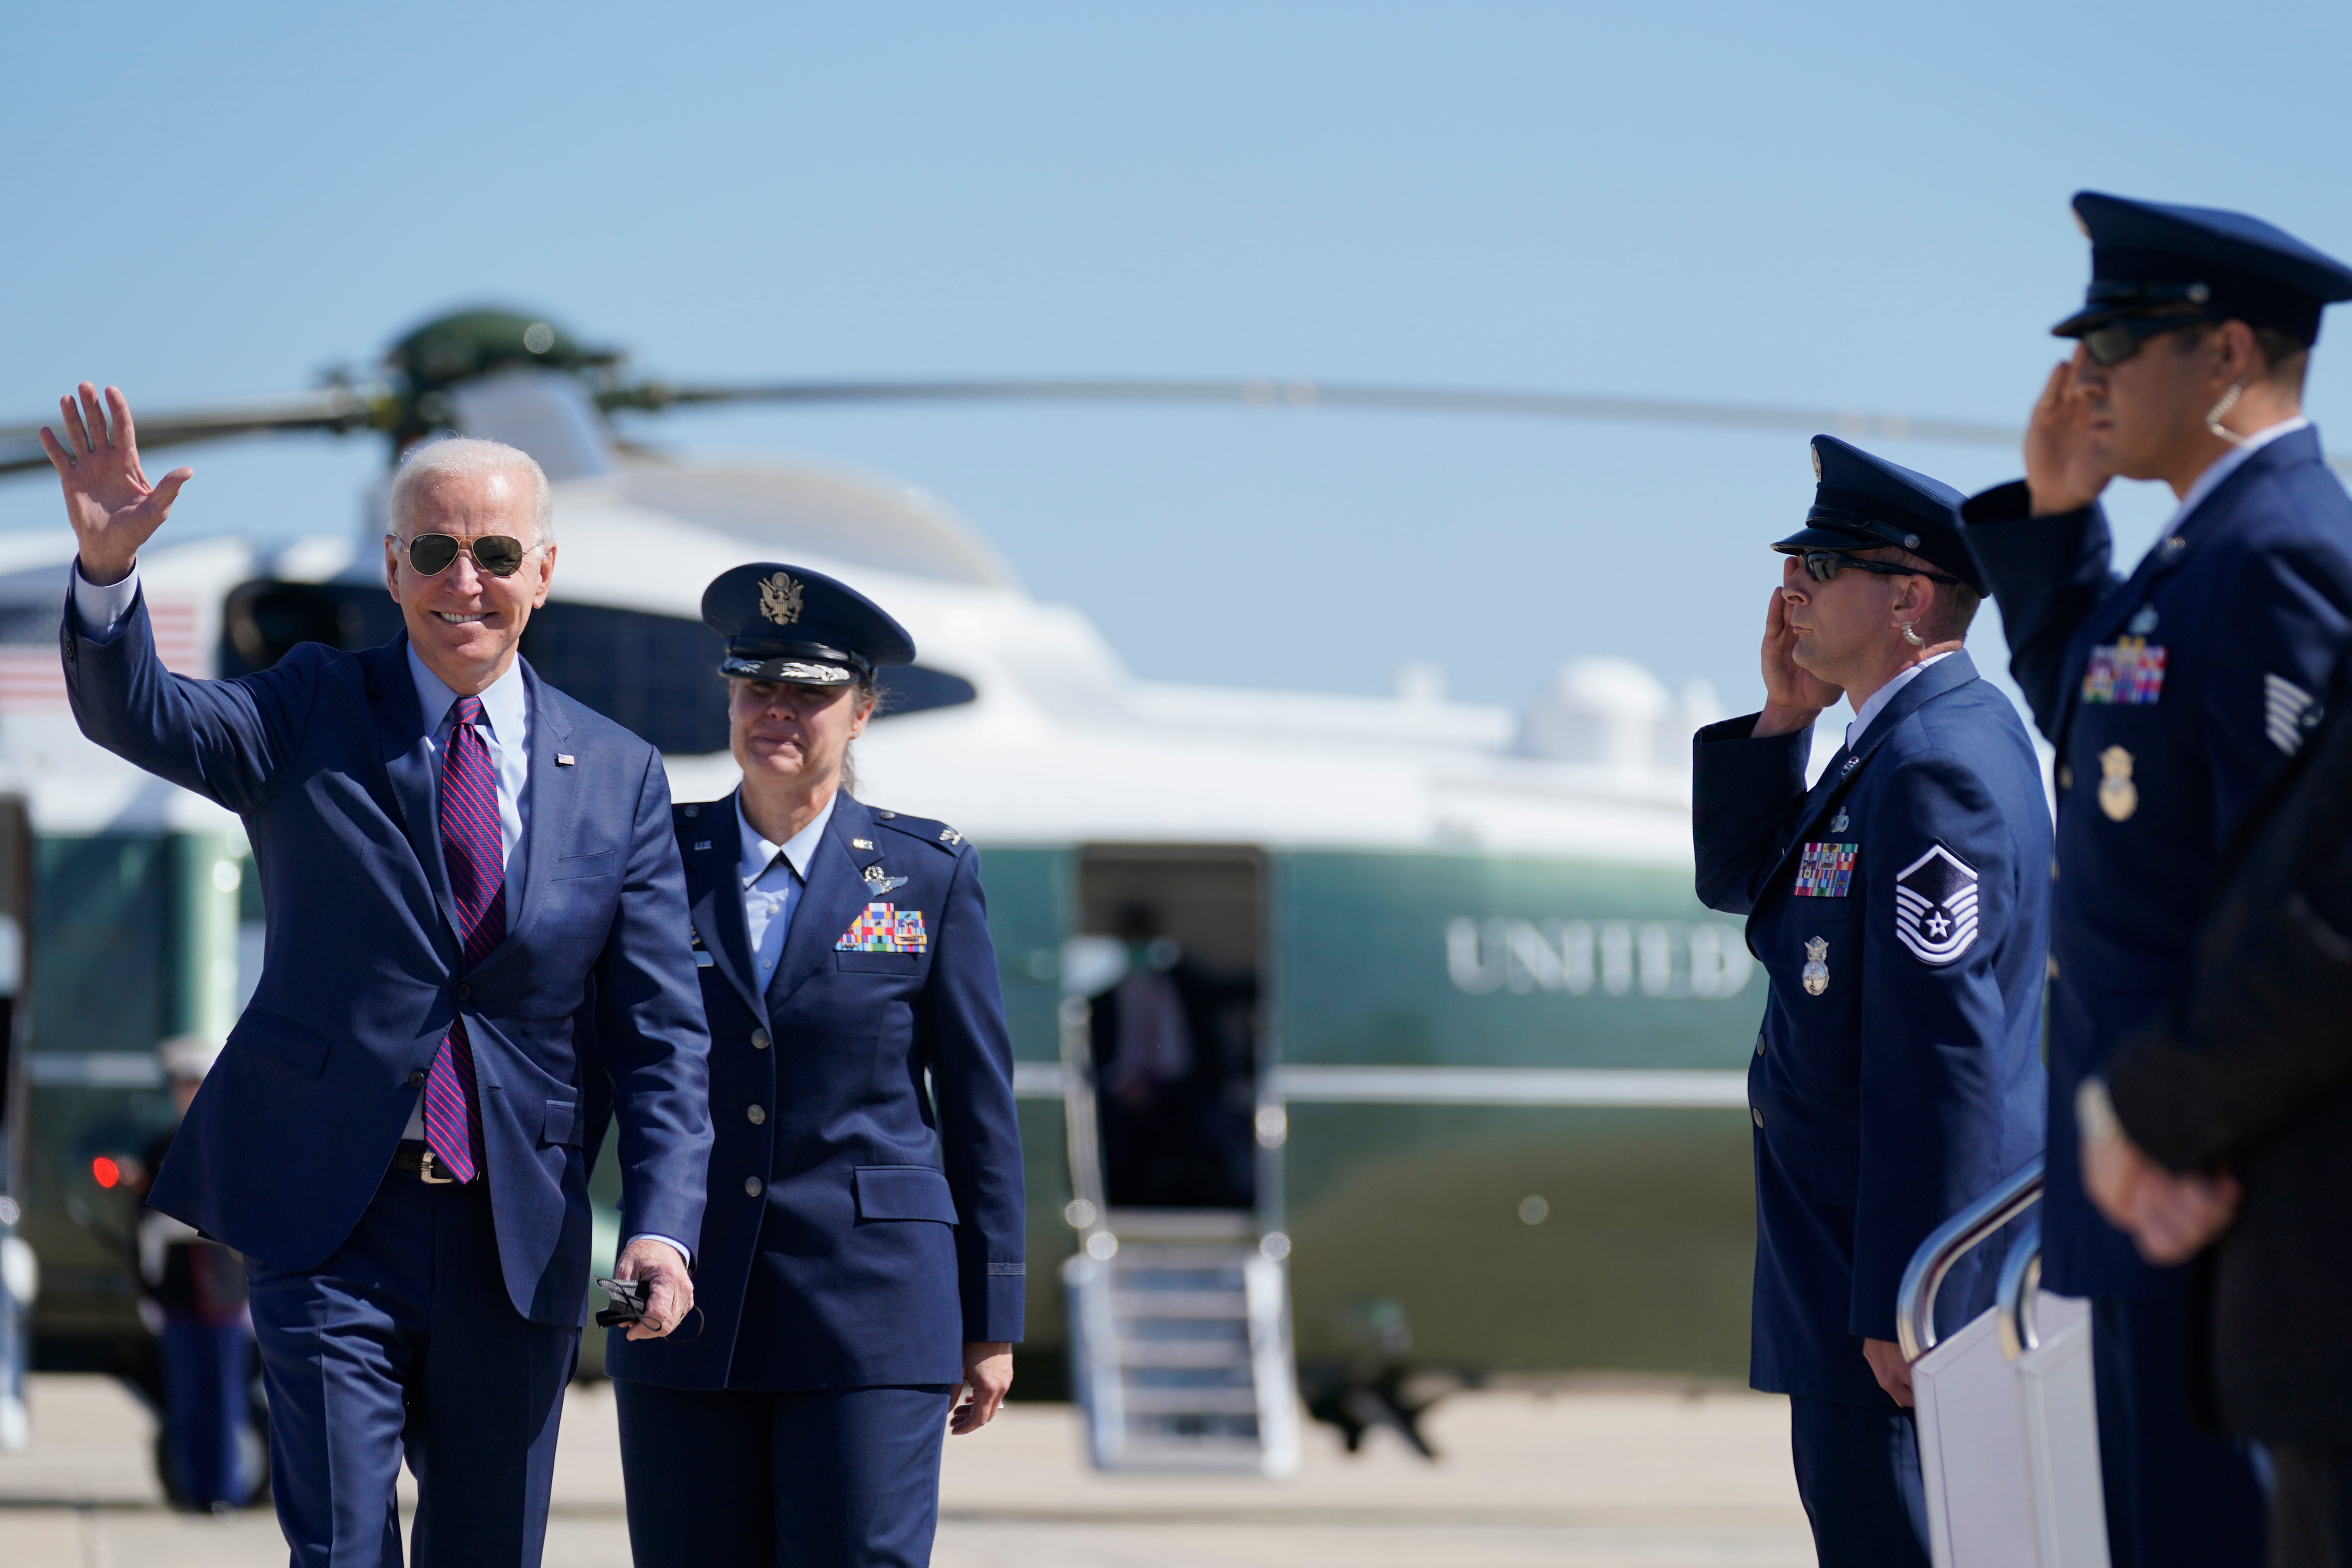 President Joe Biden waves as he walks to board Air Force One for a trip to Michigan to visit a Ford plant, Tuesday, May 18, 2021, in Andrews Air Force Base, Md.